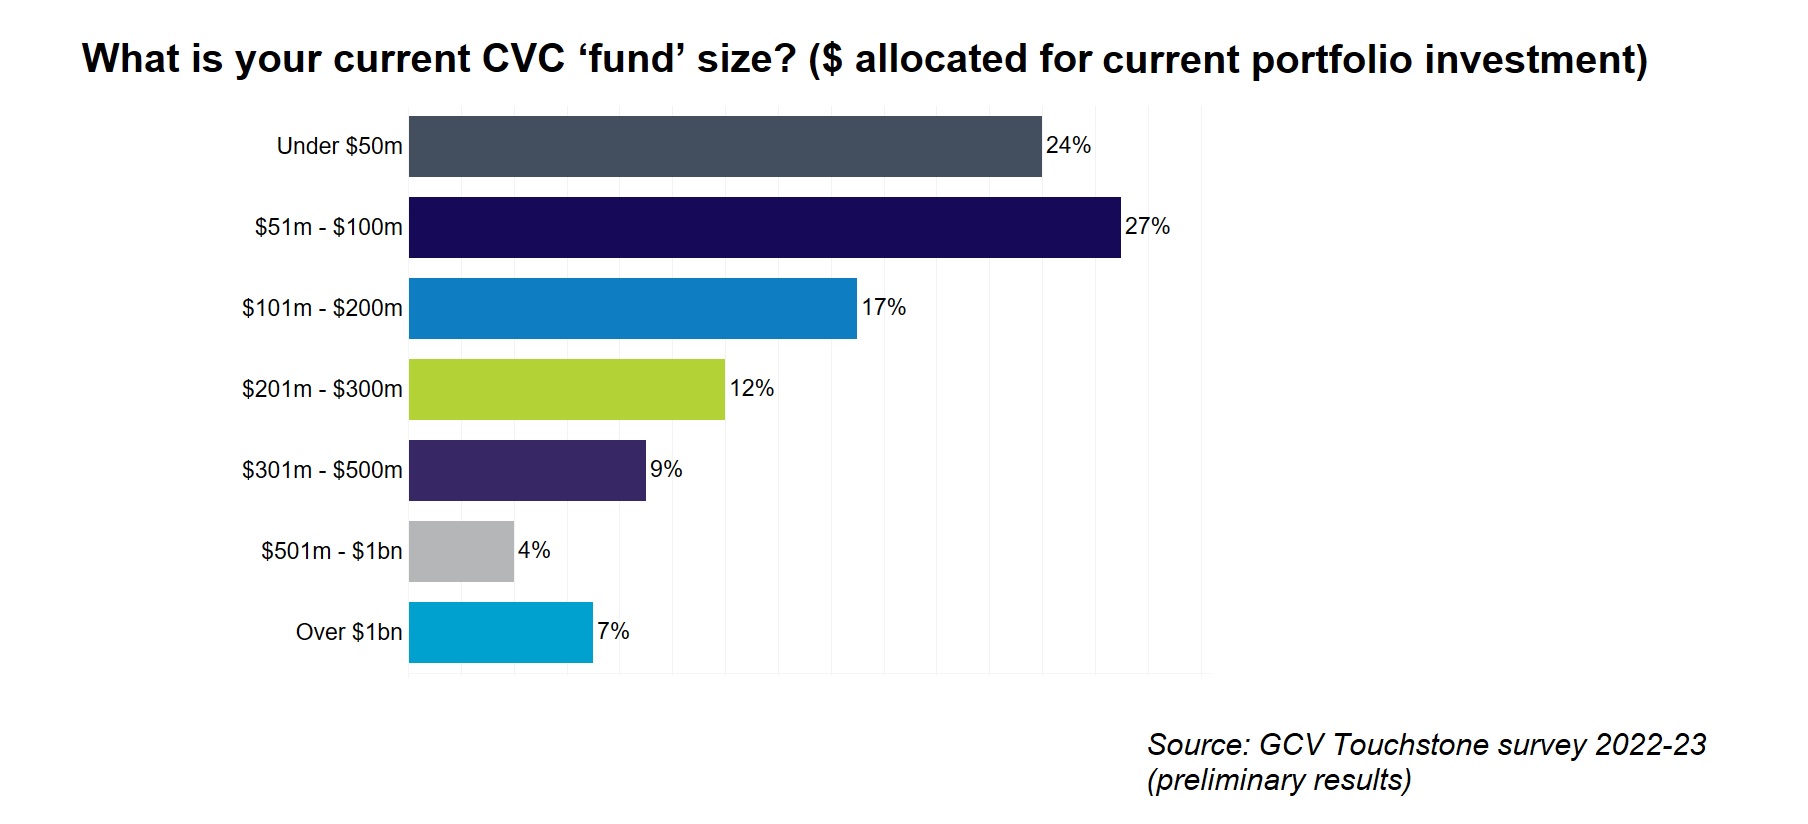 Chart showing the current CVC fundi size in $m, defined as allocated for current portfolio investment), according to the GCV Touchstone survey 2022-23 